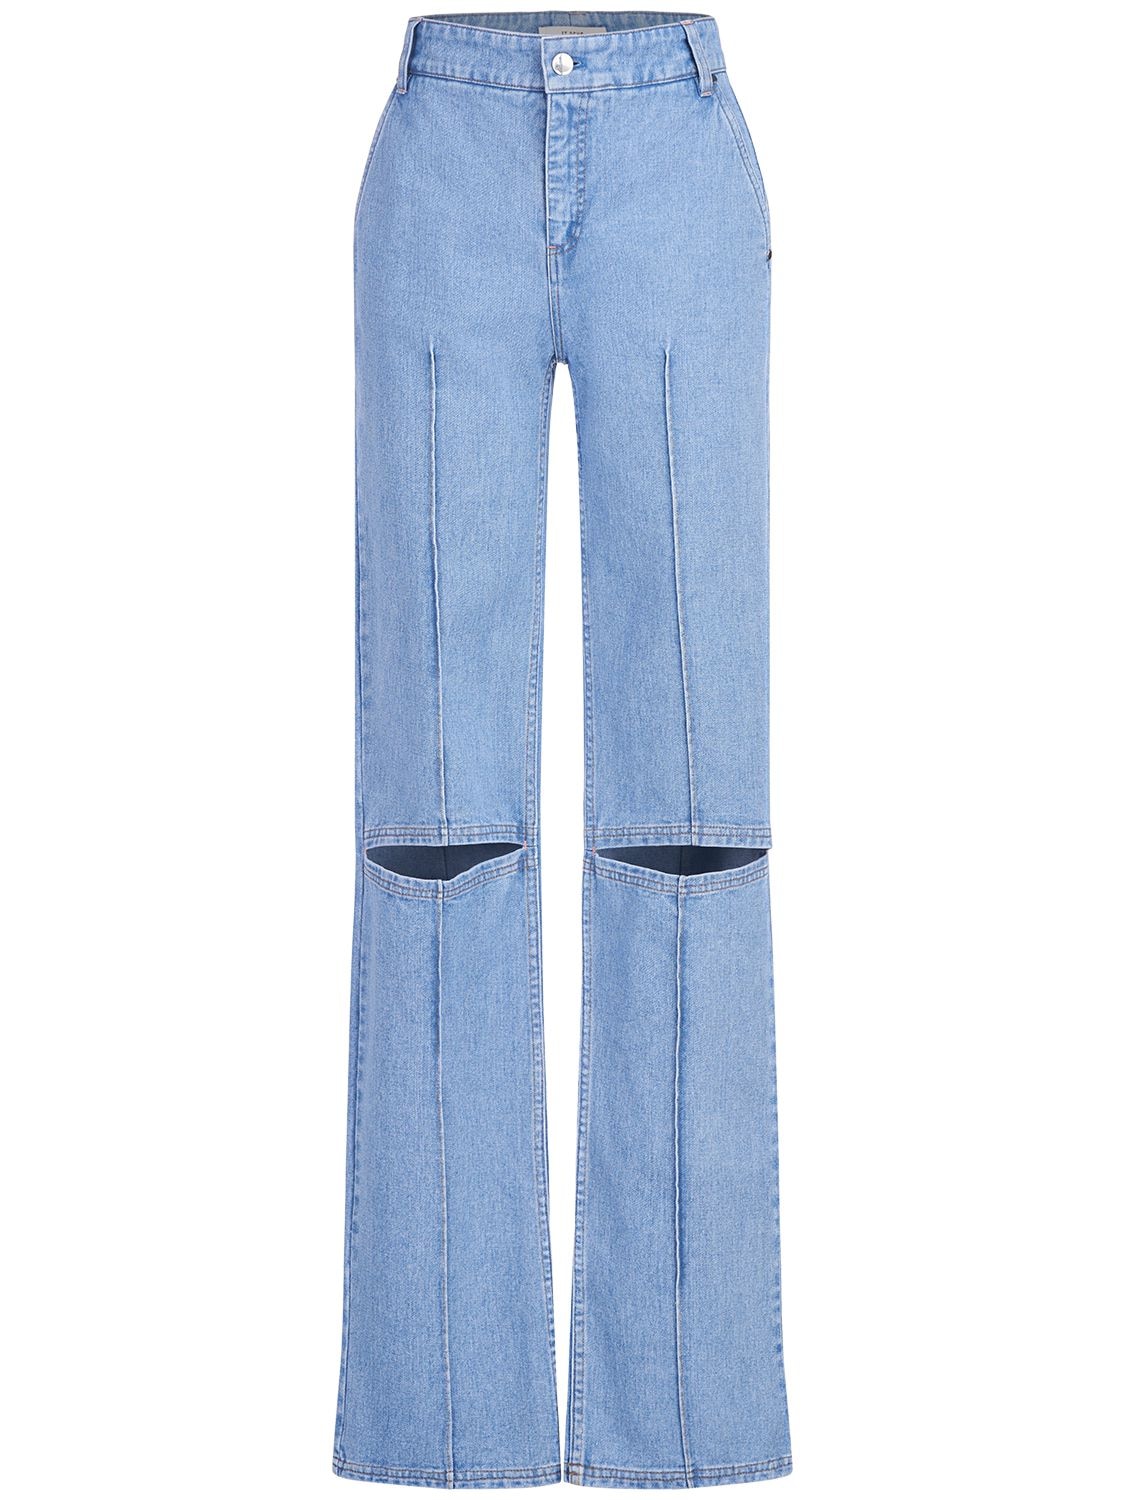 Image of Cotton Denim Mid Rise Straight Jeans